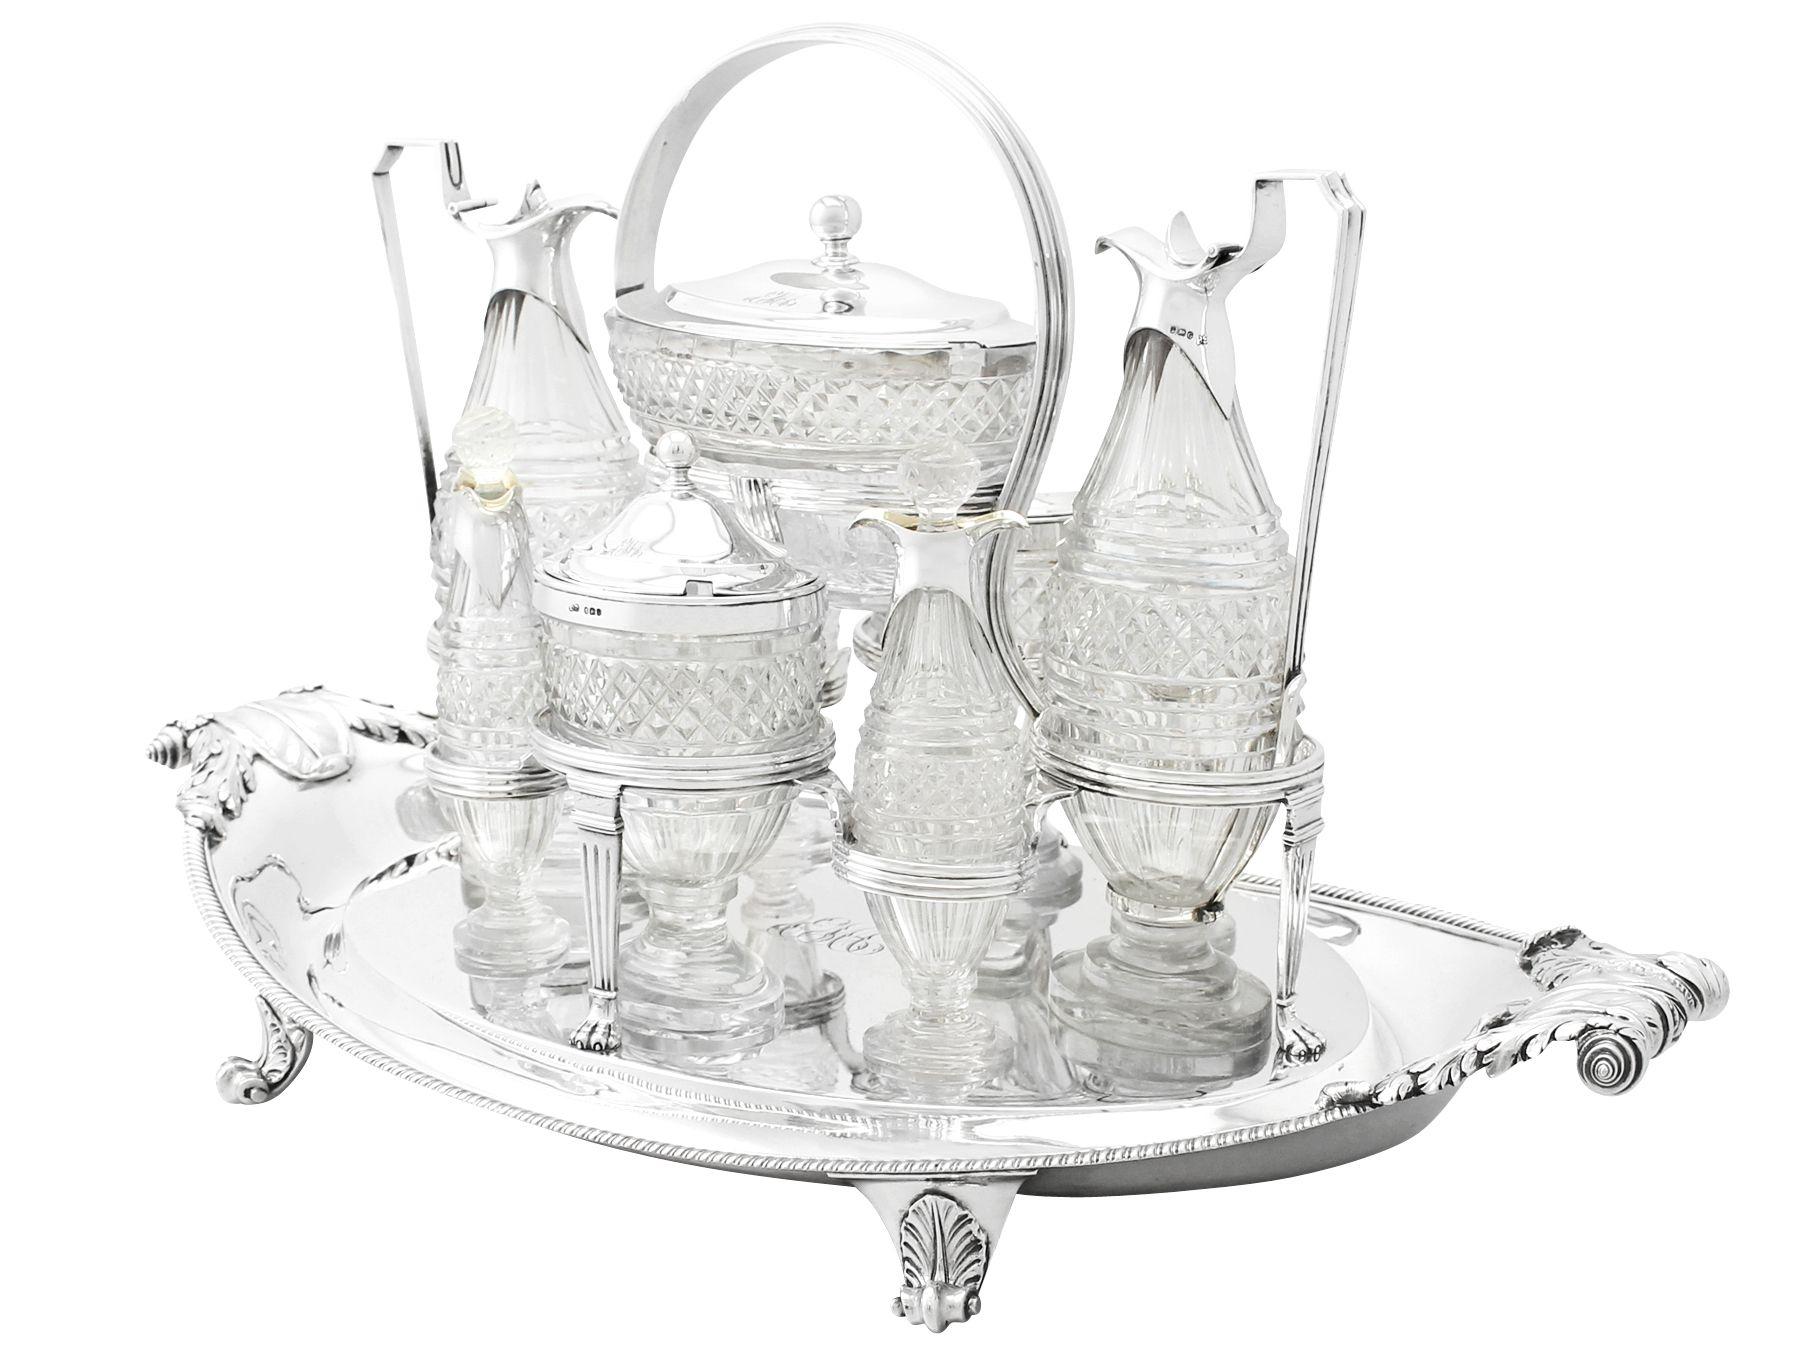 A magnificent, fine and impressive, antique Georgian English sterling silver and cut-glass nine bottle table cruet set made by Paul Storr; an addition to our collectable dining silverware.

This magnificent and large antique George III cruet set